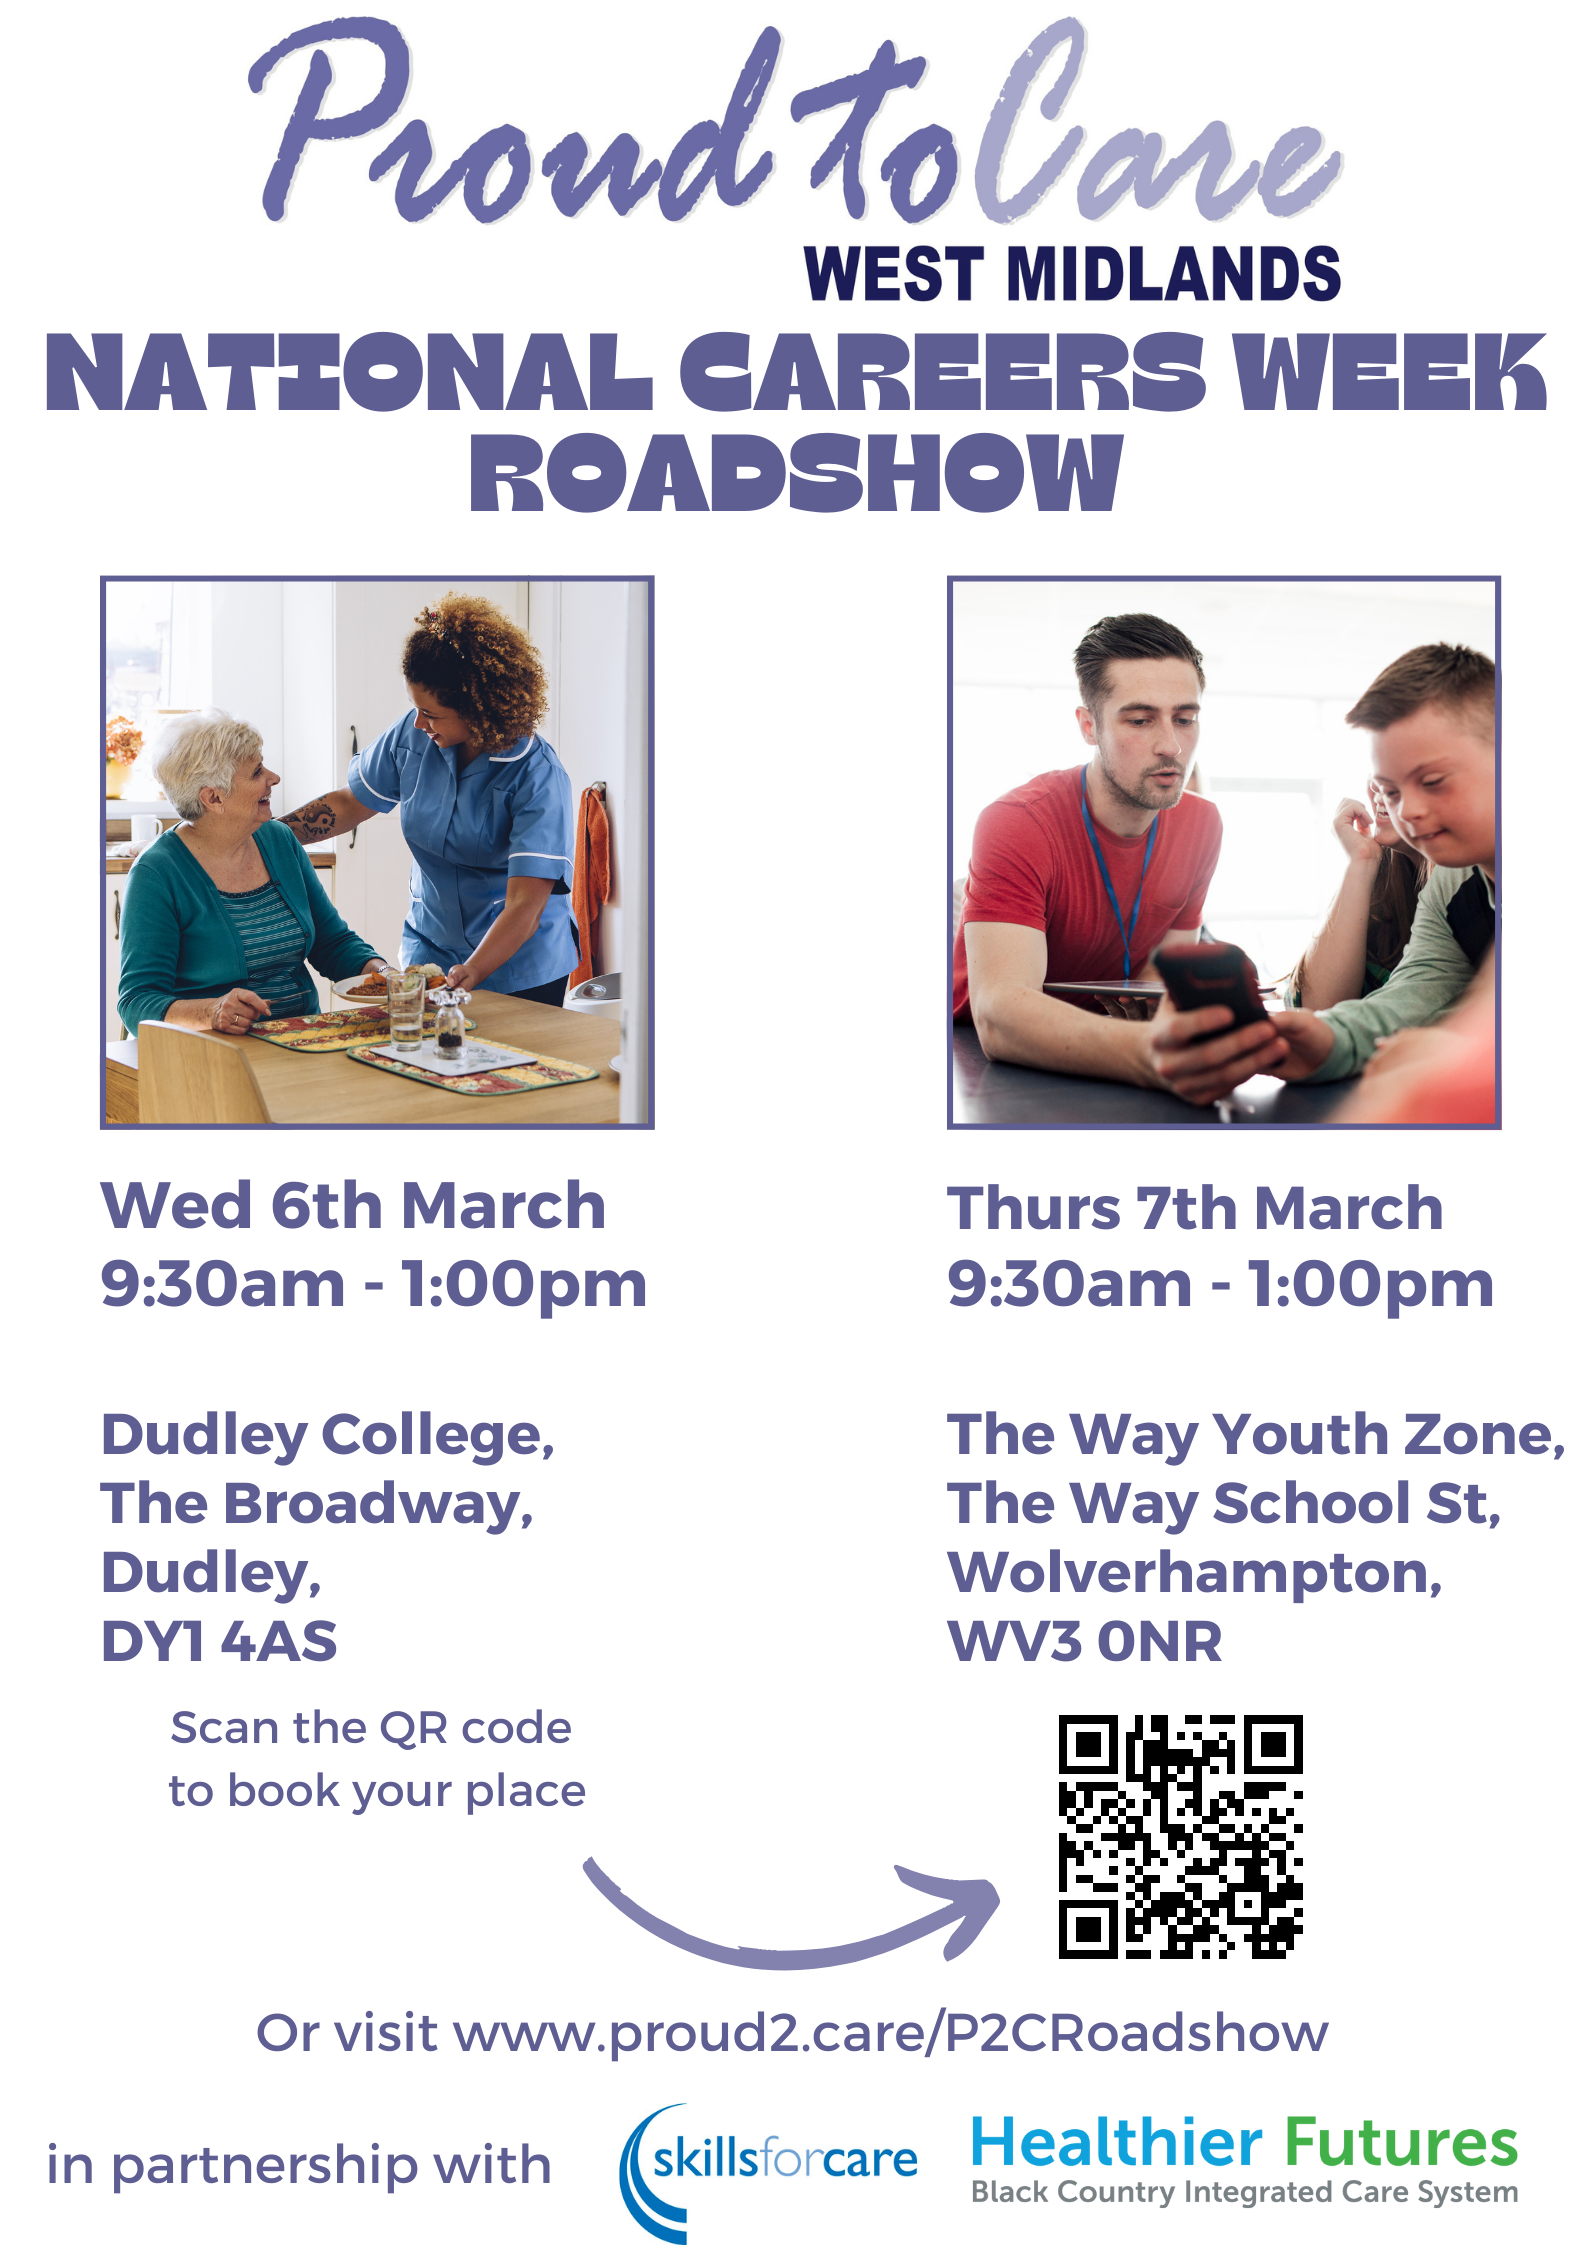 https://stratus.campaign-image.eu/images/32883000015039016_zc_v1_1708526273729_p2c_careers_week_roadshow_event_poster.png.png